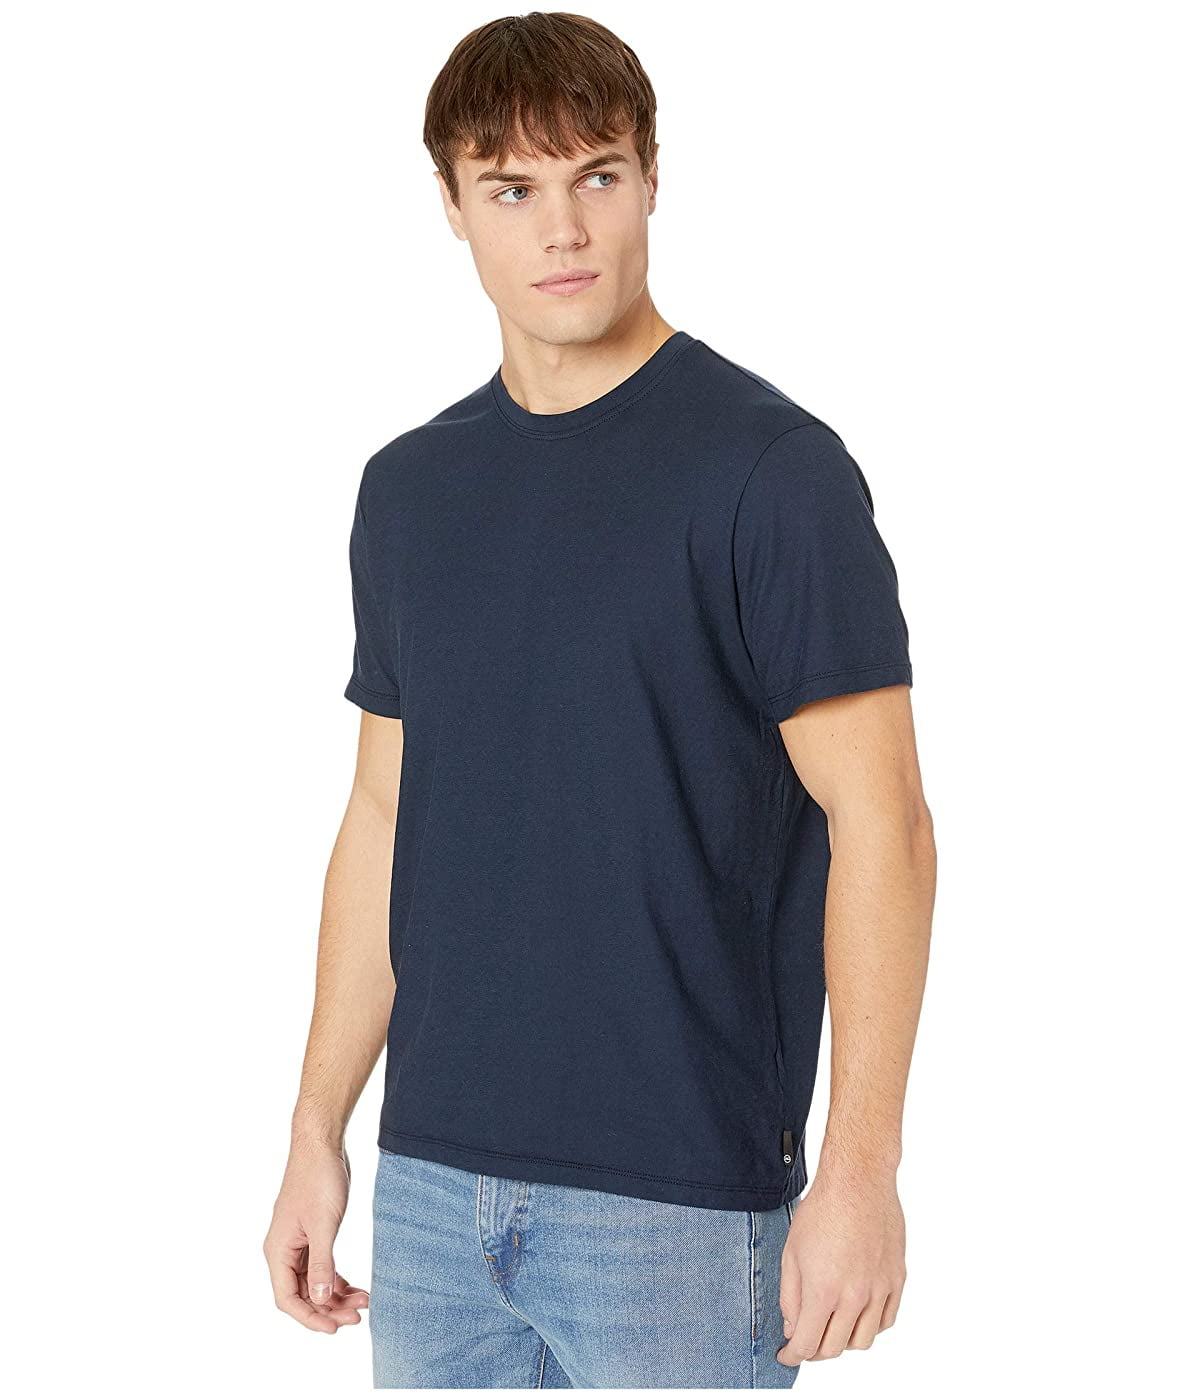 AG Adriano Goldschmied Mens Bryce Short Sleeve Heathered Crew Neck Tee 